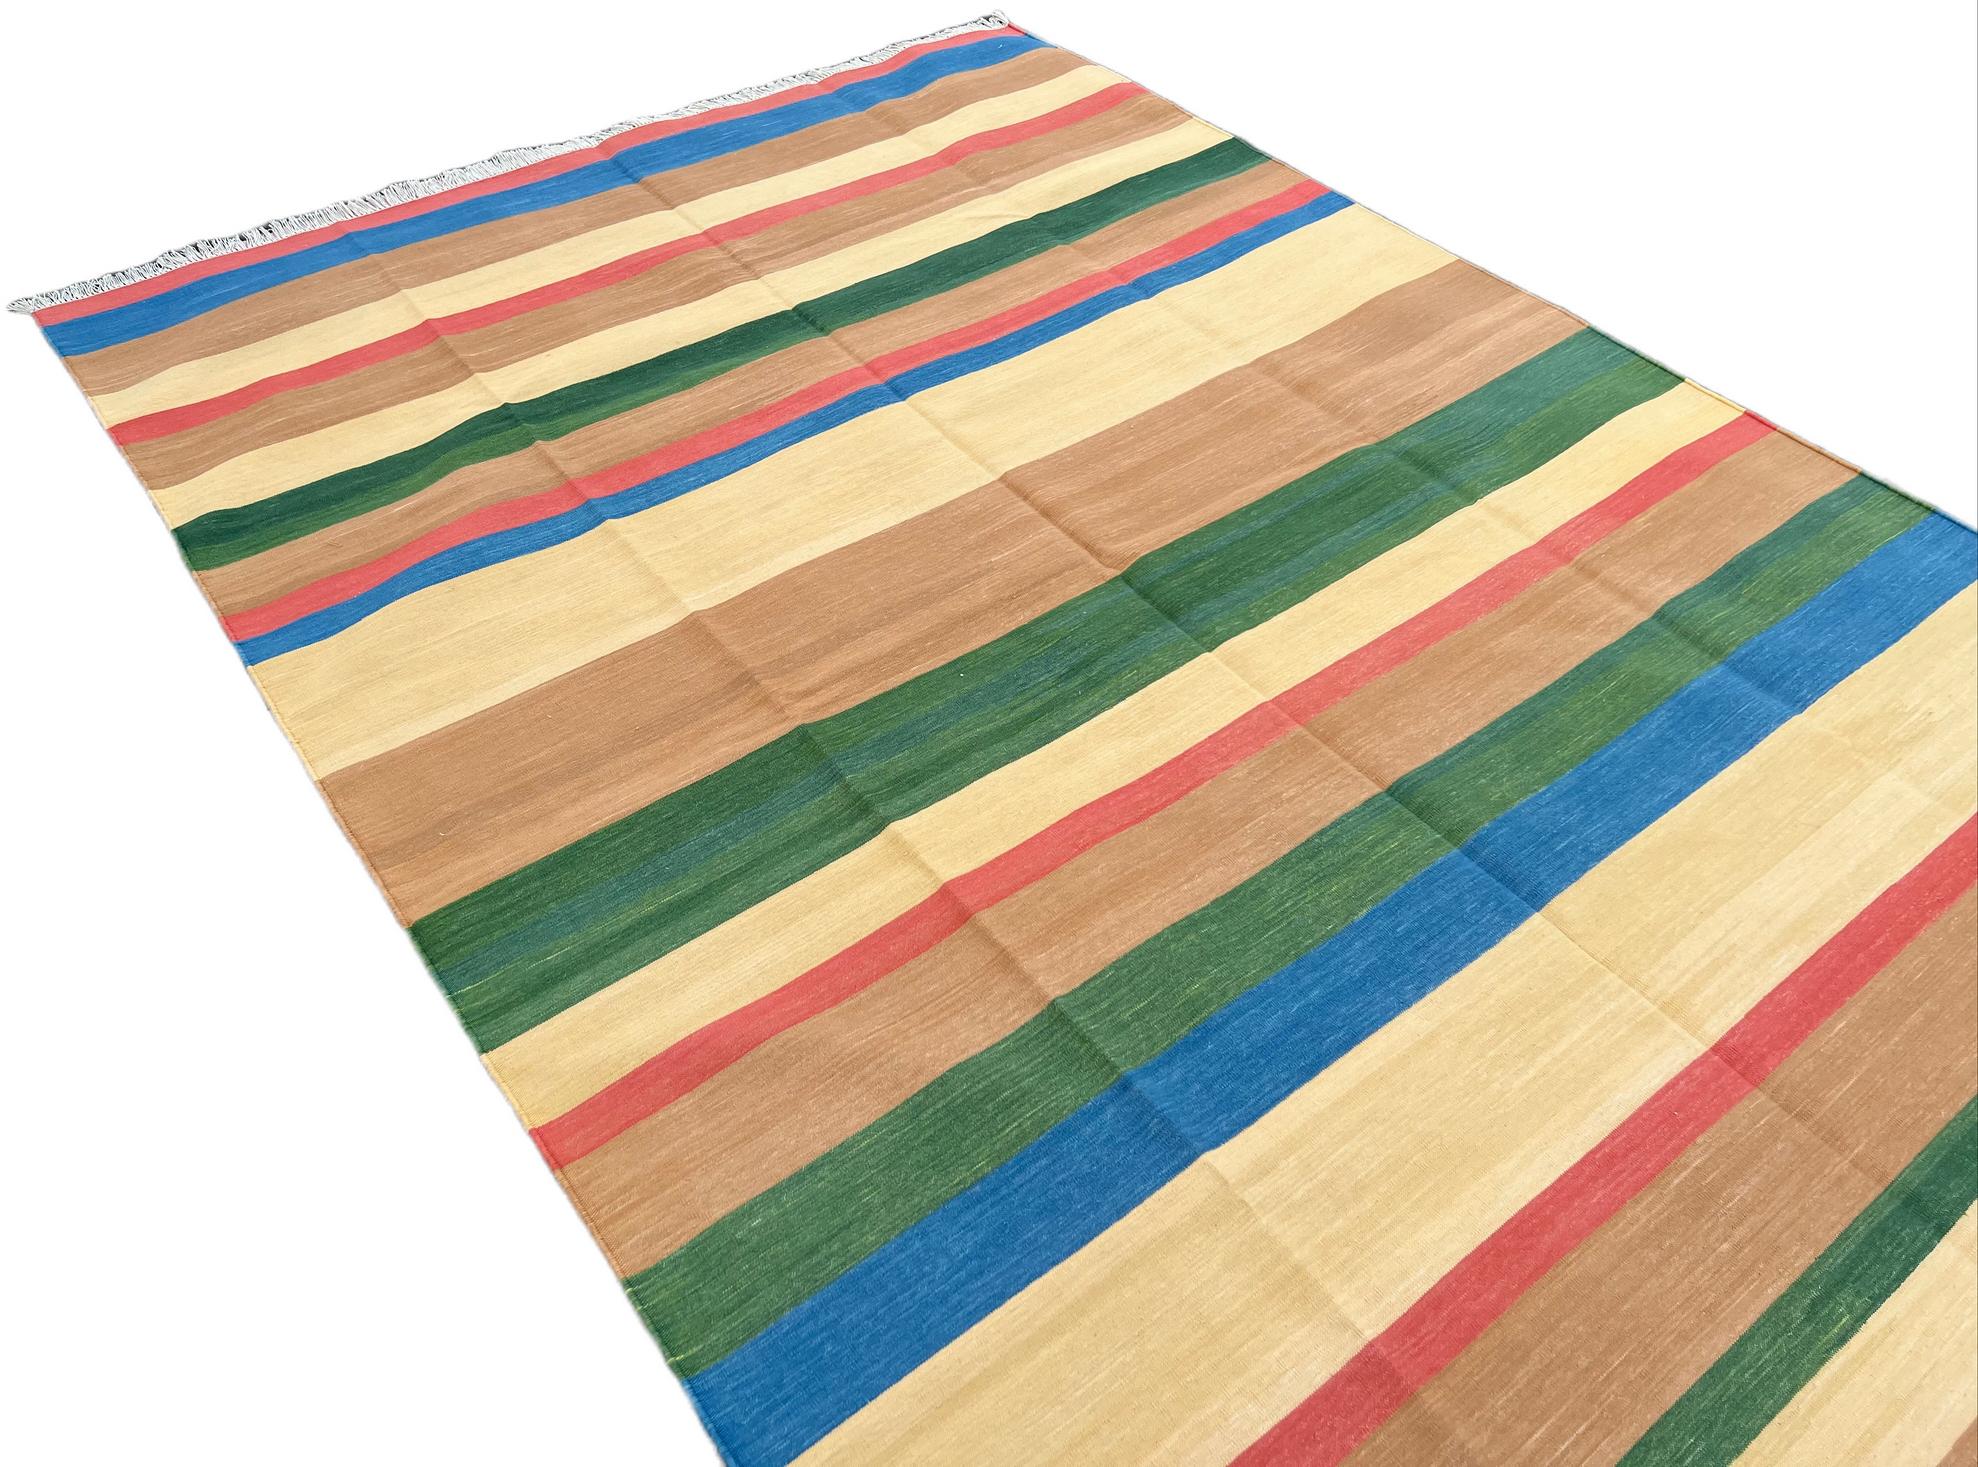 Indian Handmade Cotton Area Flat Weave Rug, 6x9 Tan, Blue And Green Striped Dhurrie Rug For Sale